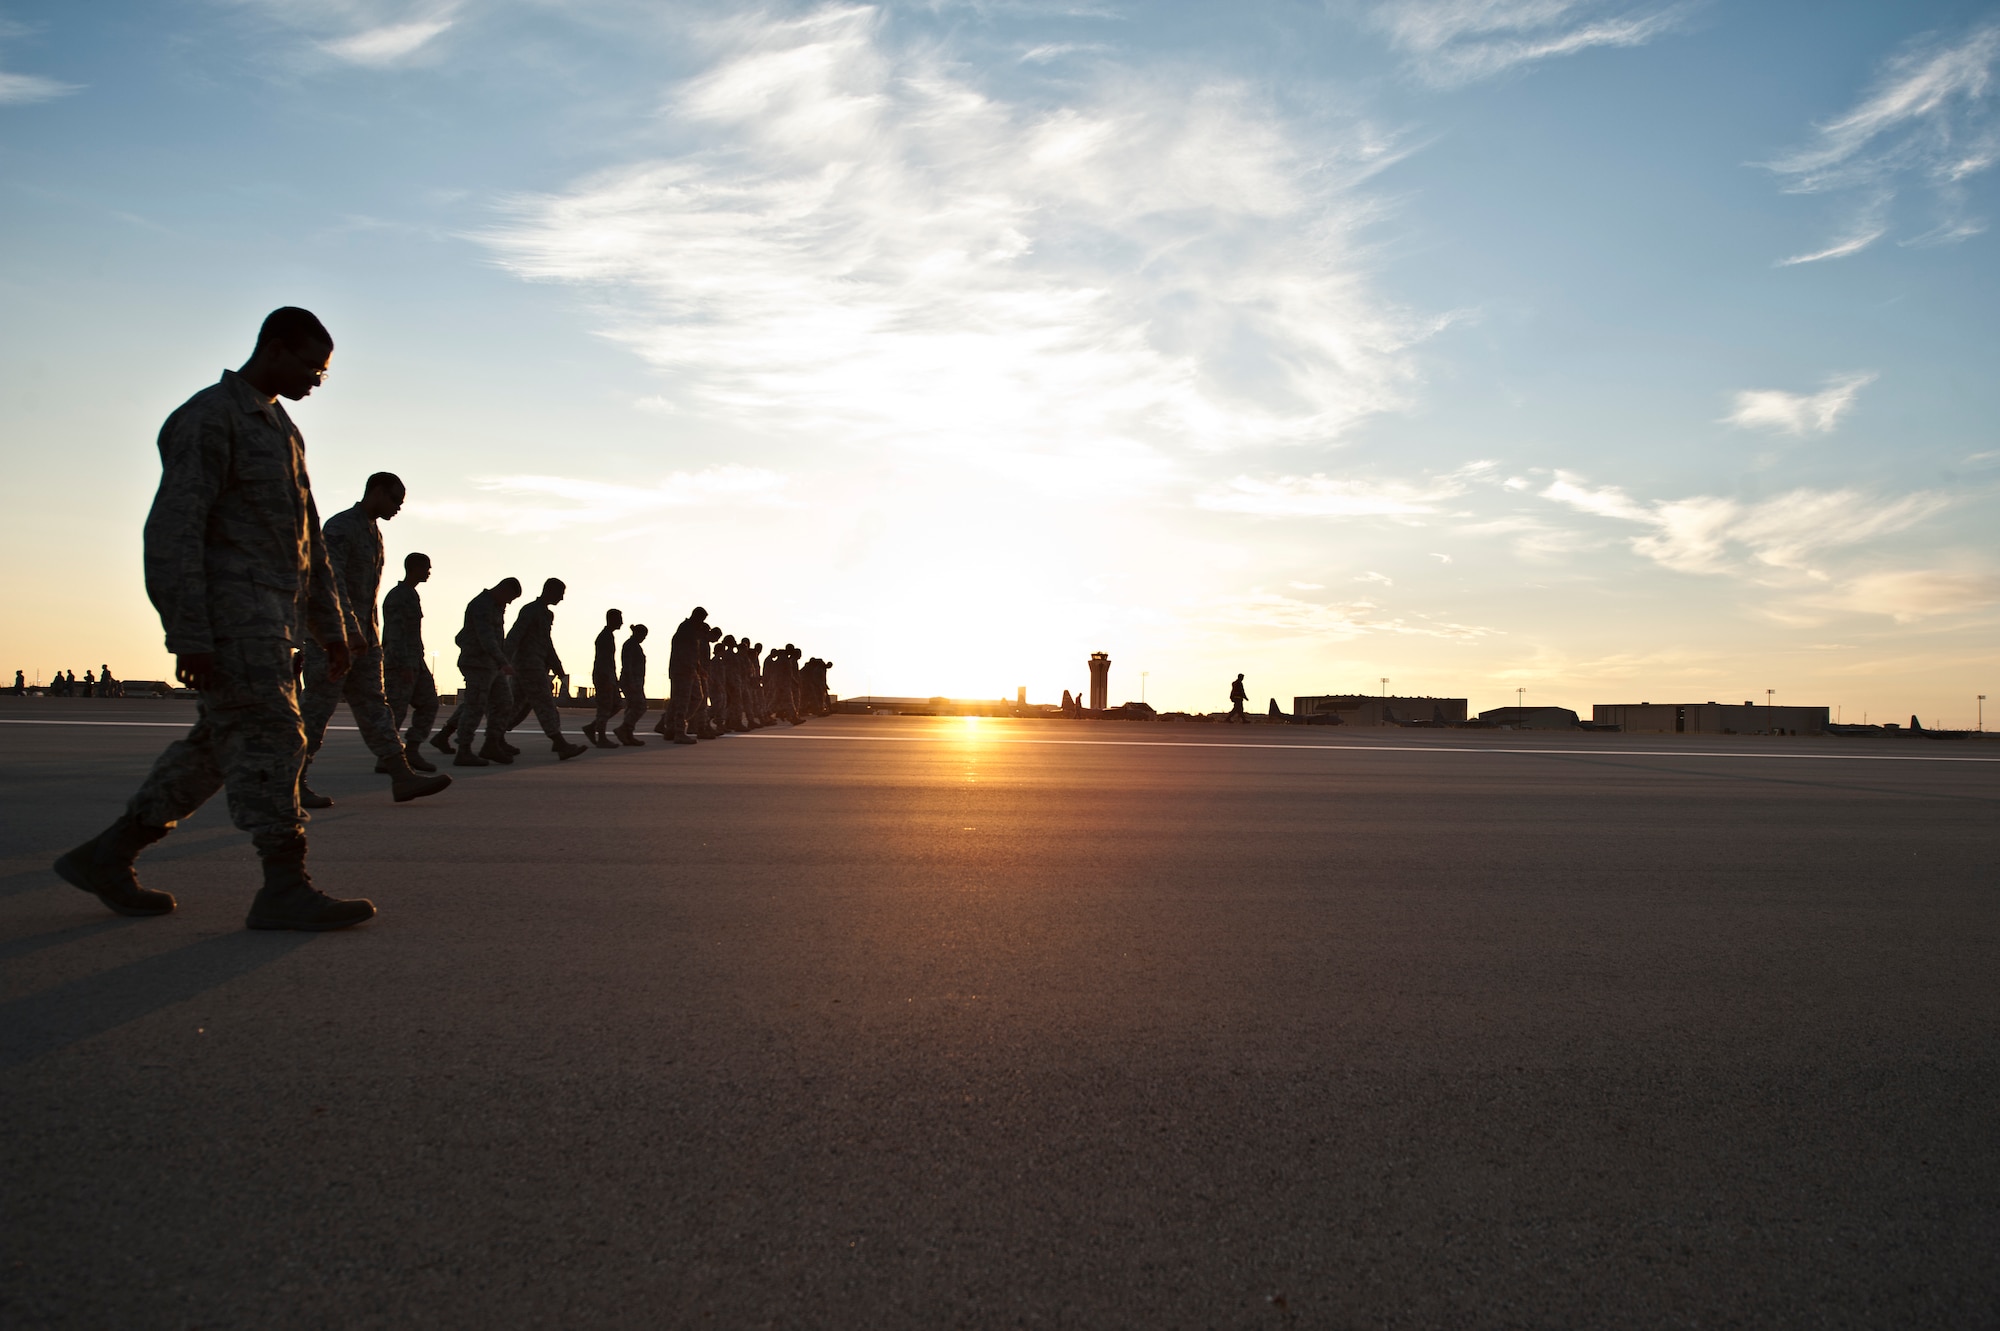 Dyess Airmen conduct a Foreign Object Debris (FOD) walk down the flightline Sept. 9, 2013, at Dyess Air Force Base, Texas. On Aug. 29, Dyess reached a new pinnacle of FOD prevention; 1,500 days without a chargeable FOD incident. FOD is considered a substance, debris or article alien to a vehicle or system which can cause significant damage to an aircraft. (U.S. Air Force photo by Staff Sgt. Richard Ebensberger/Released)